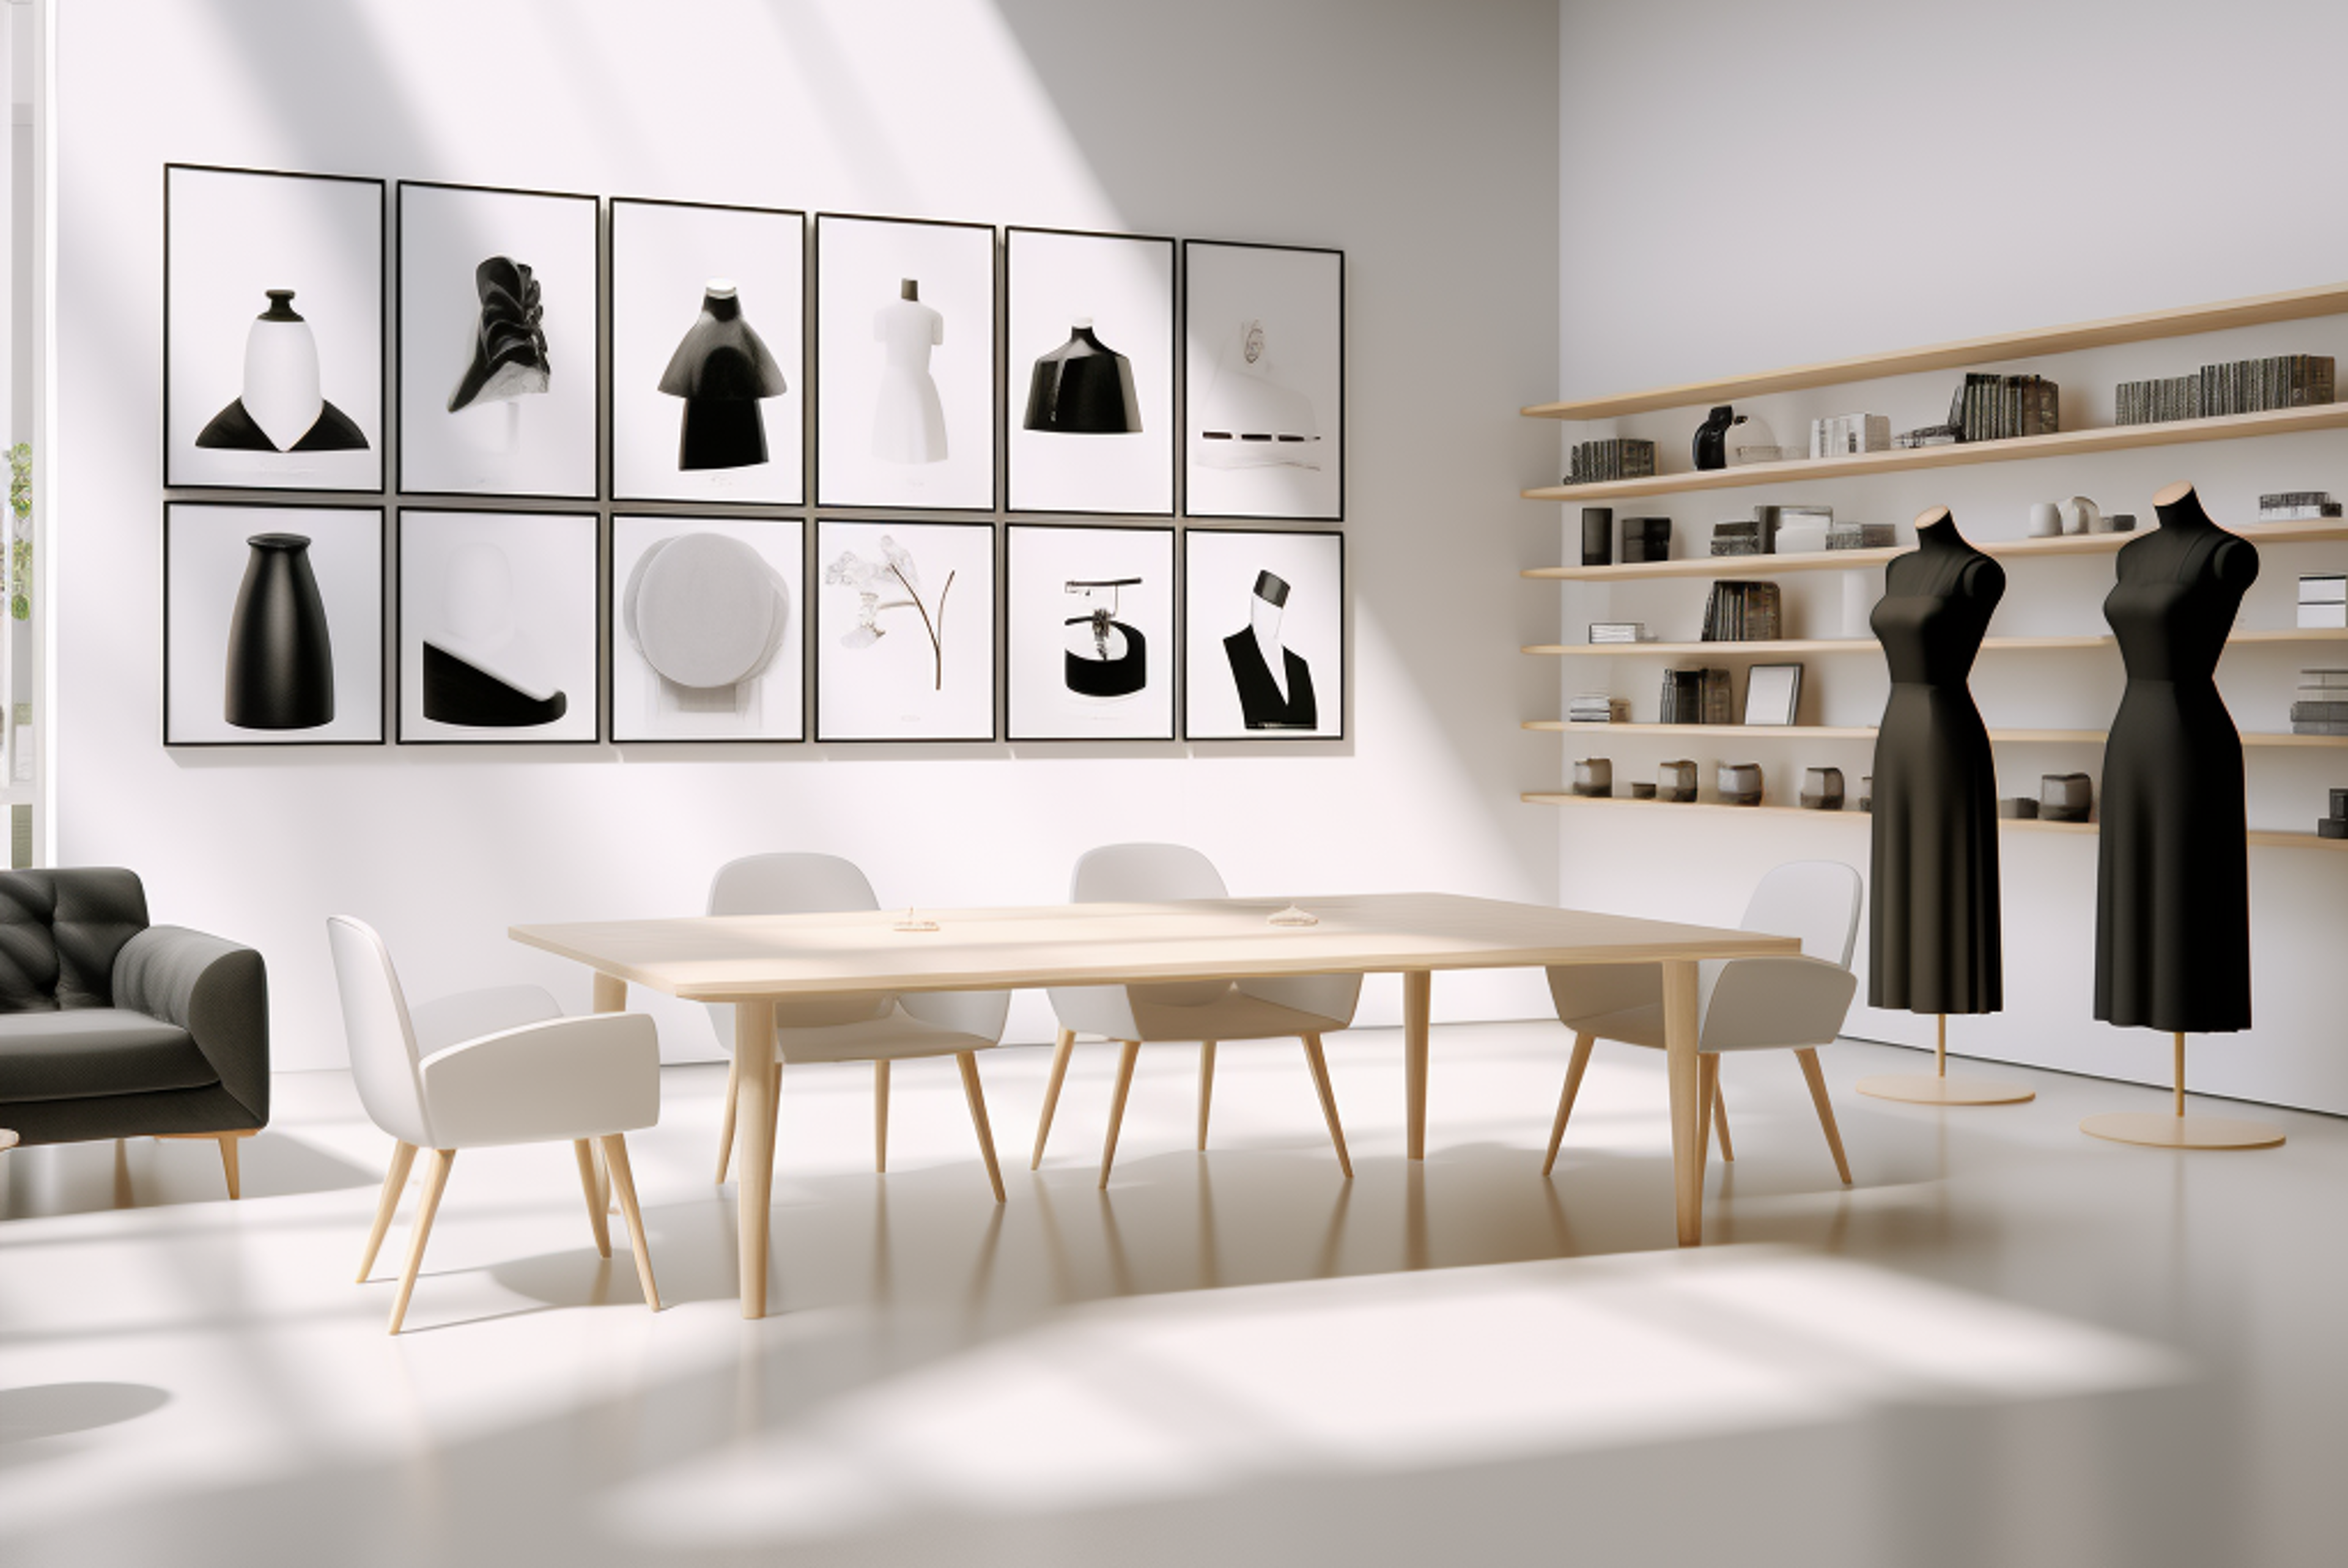 A serene studio space with monochromatic fashion exhibits and a sleek, modern furniture arrangement.